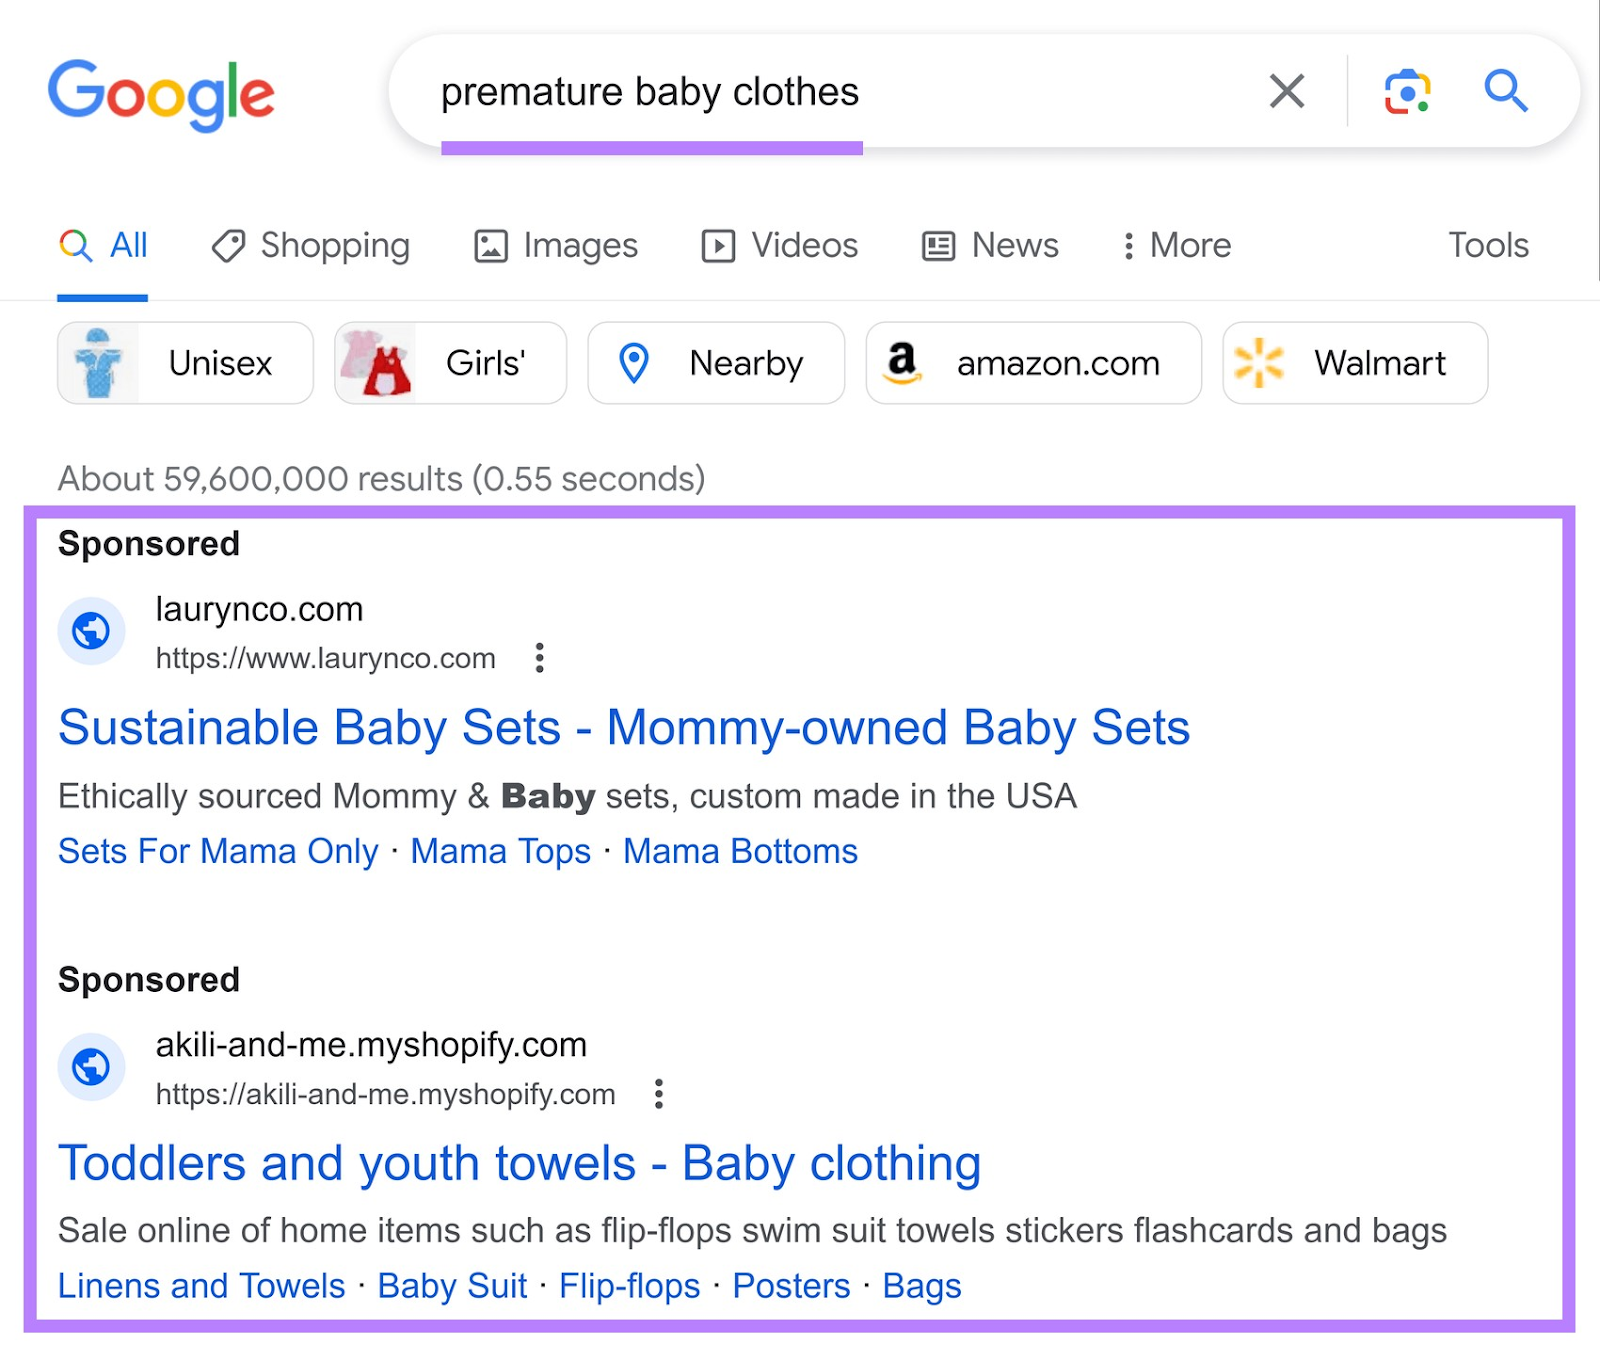 an example of Google search results for “premature baby clothes” showing sponsored results